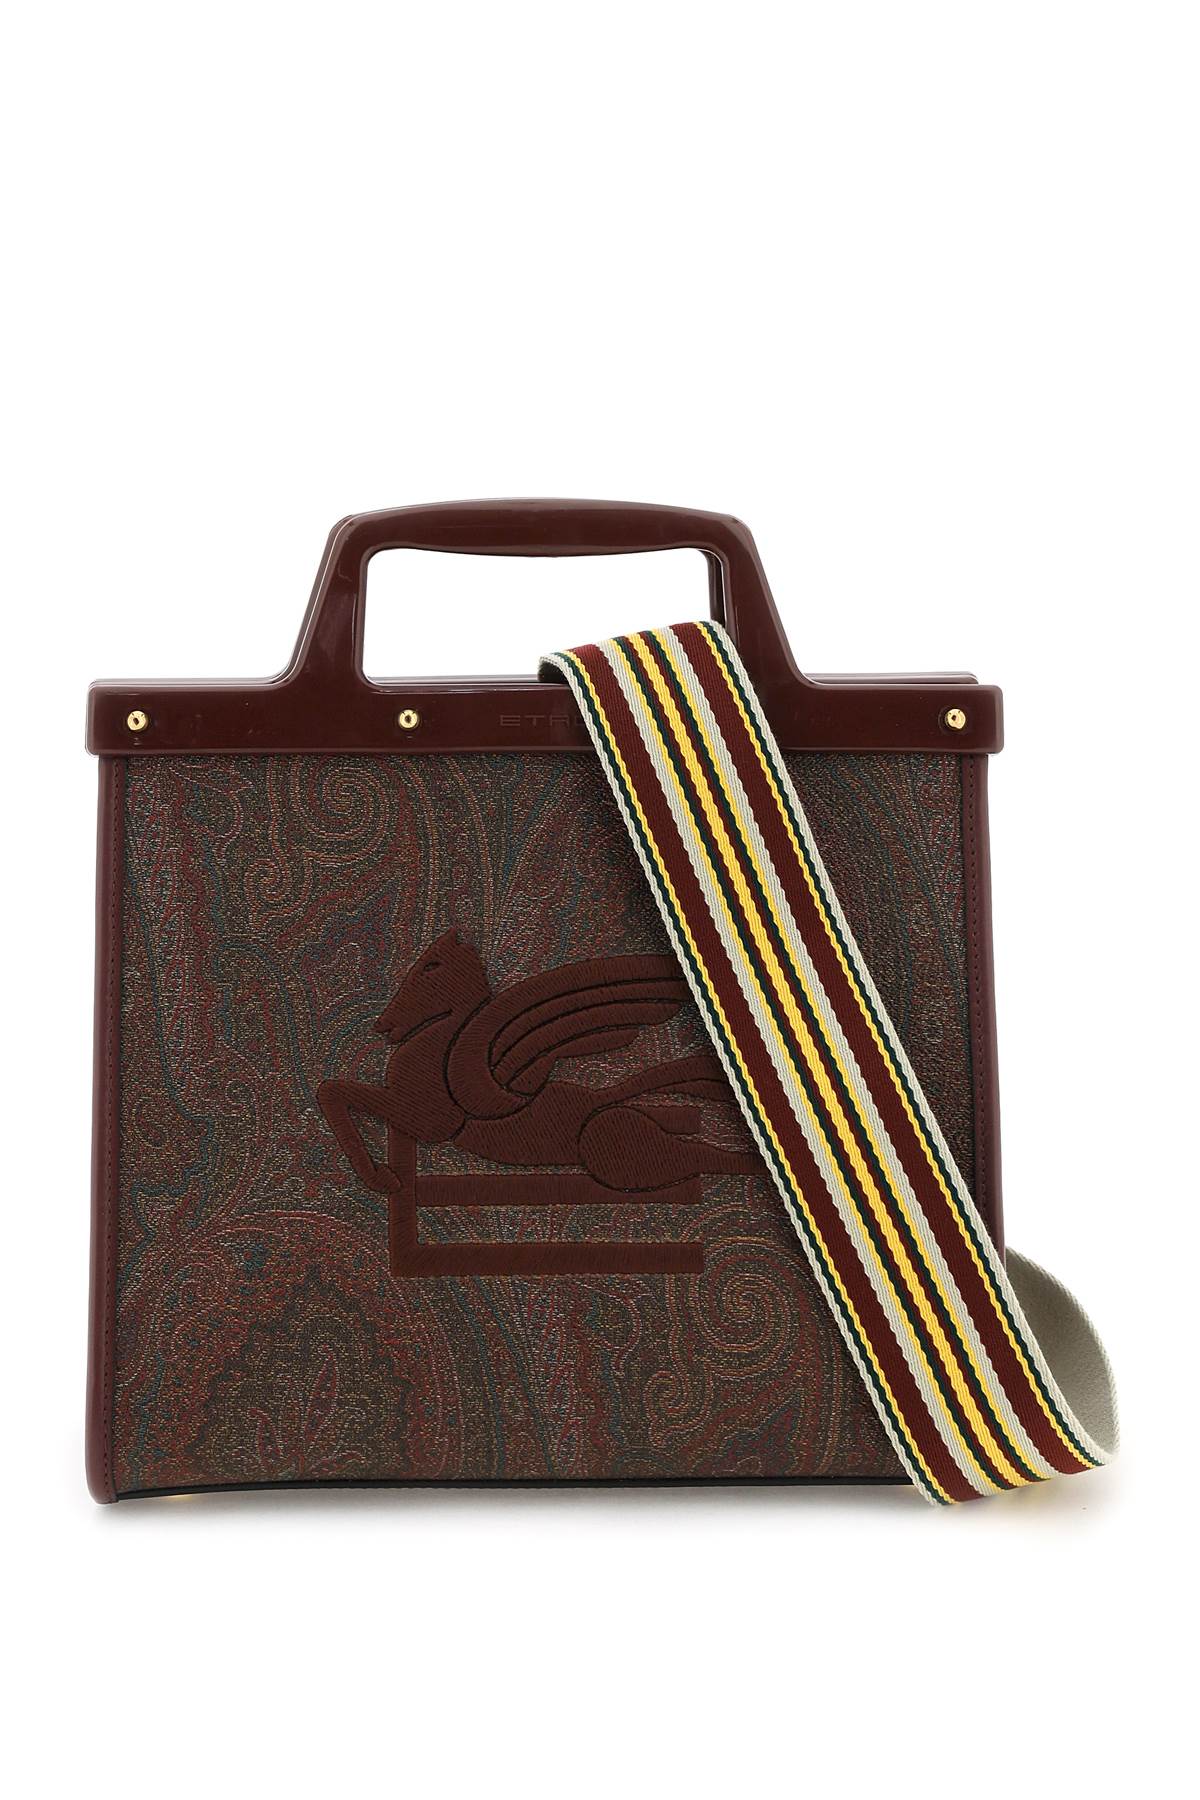 ETRO Mini Love Trotter Tote Handbag with Pegasus Embroidery and Leather Accents, Red